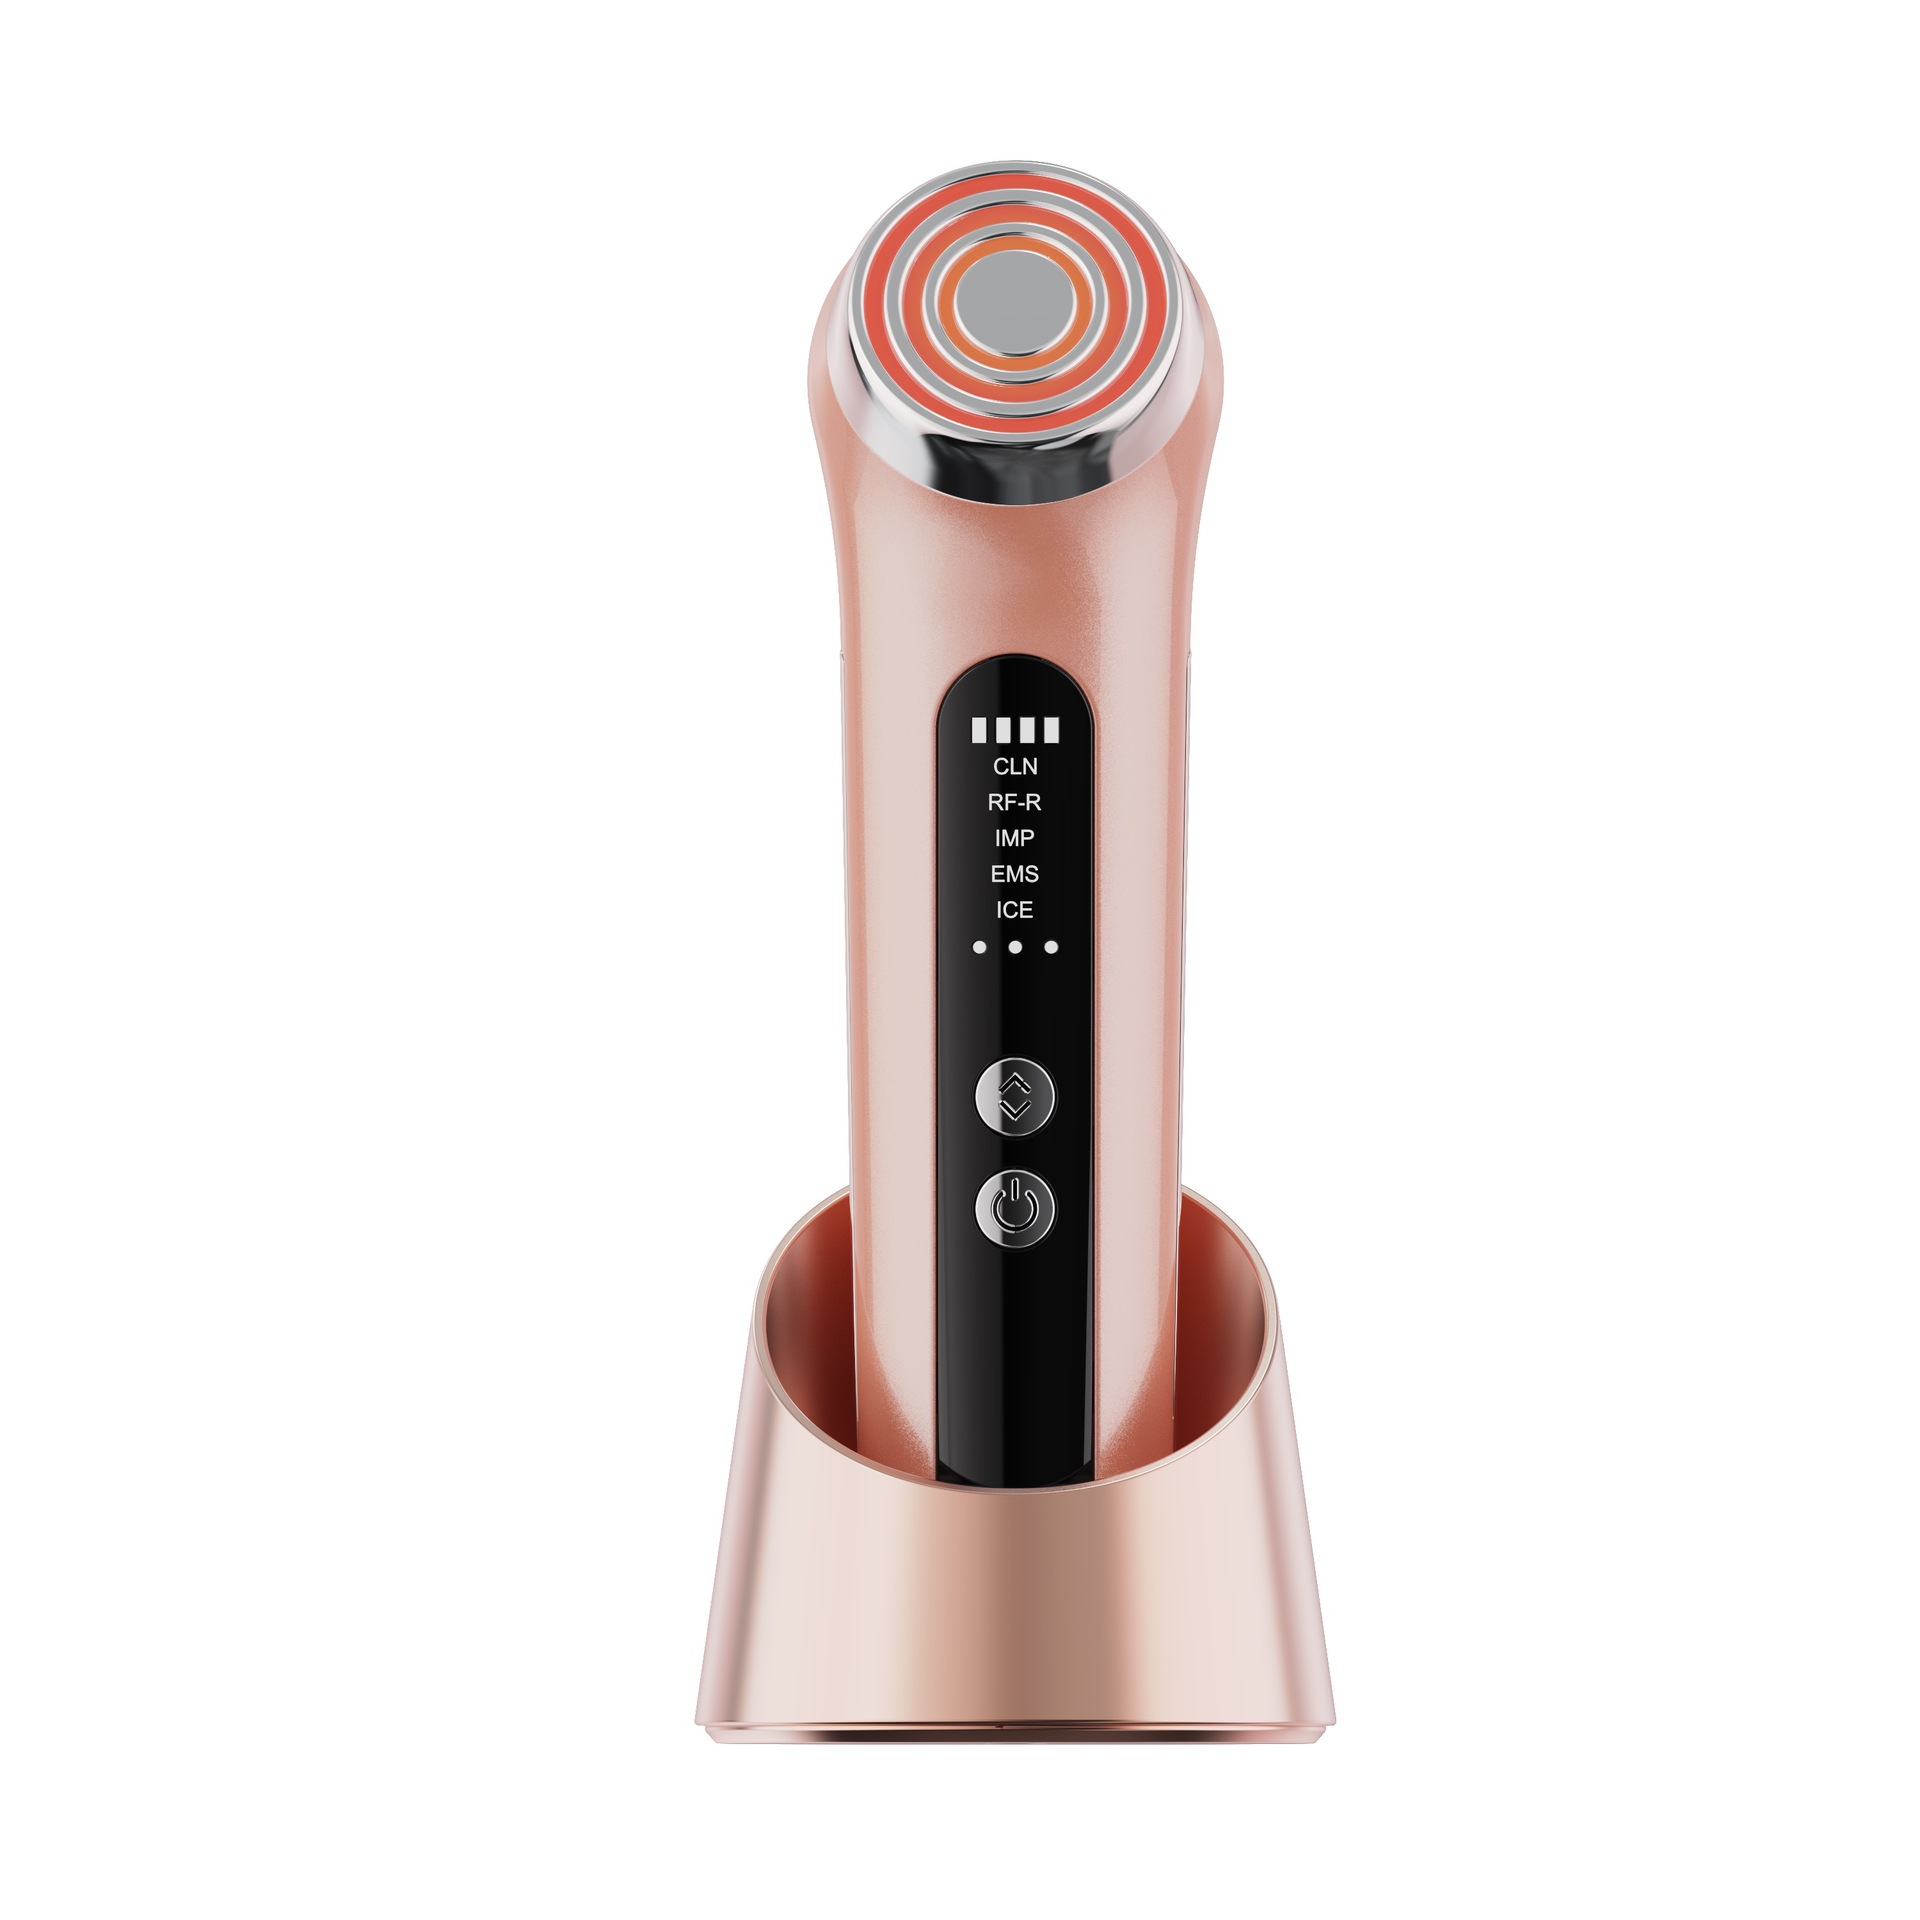 New color light tender skin multi-pole high frequency face cleaning, firming and lifting portable beauty RF instrument